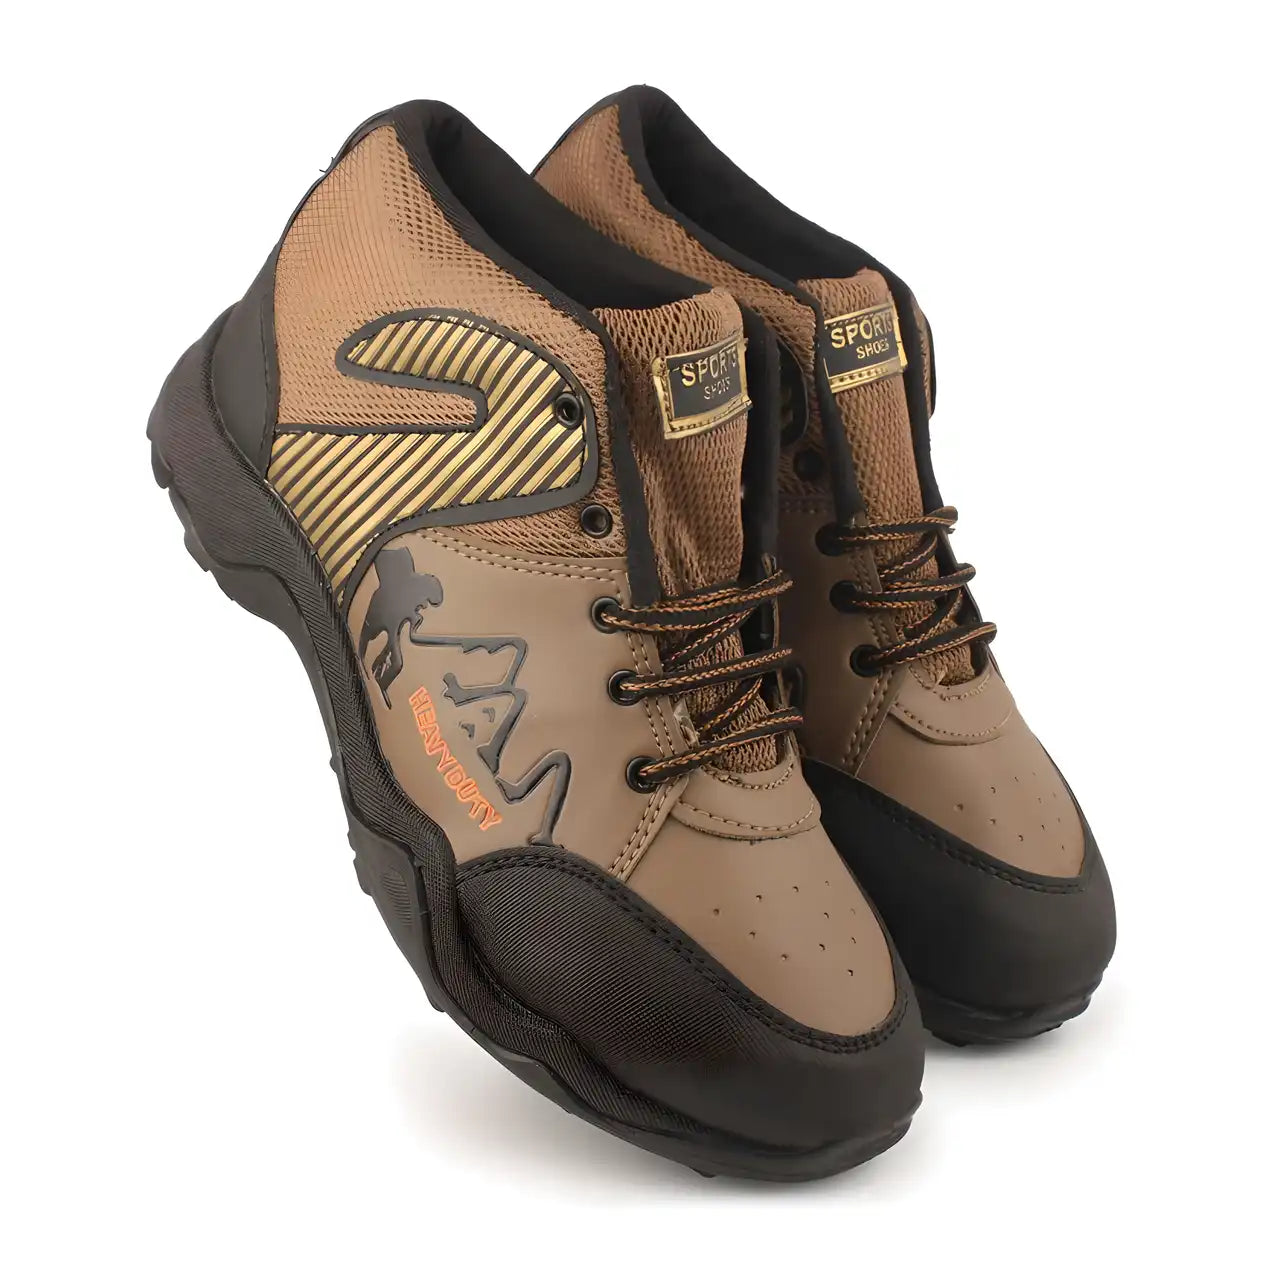 Fashionable 416 Boot Shoes for Men